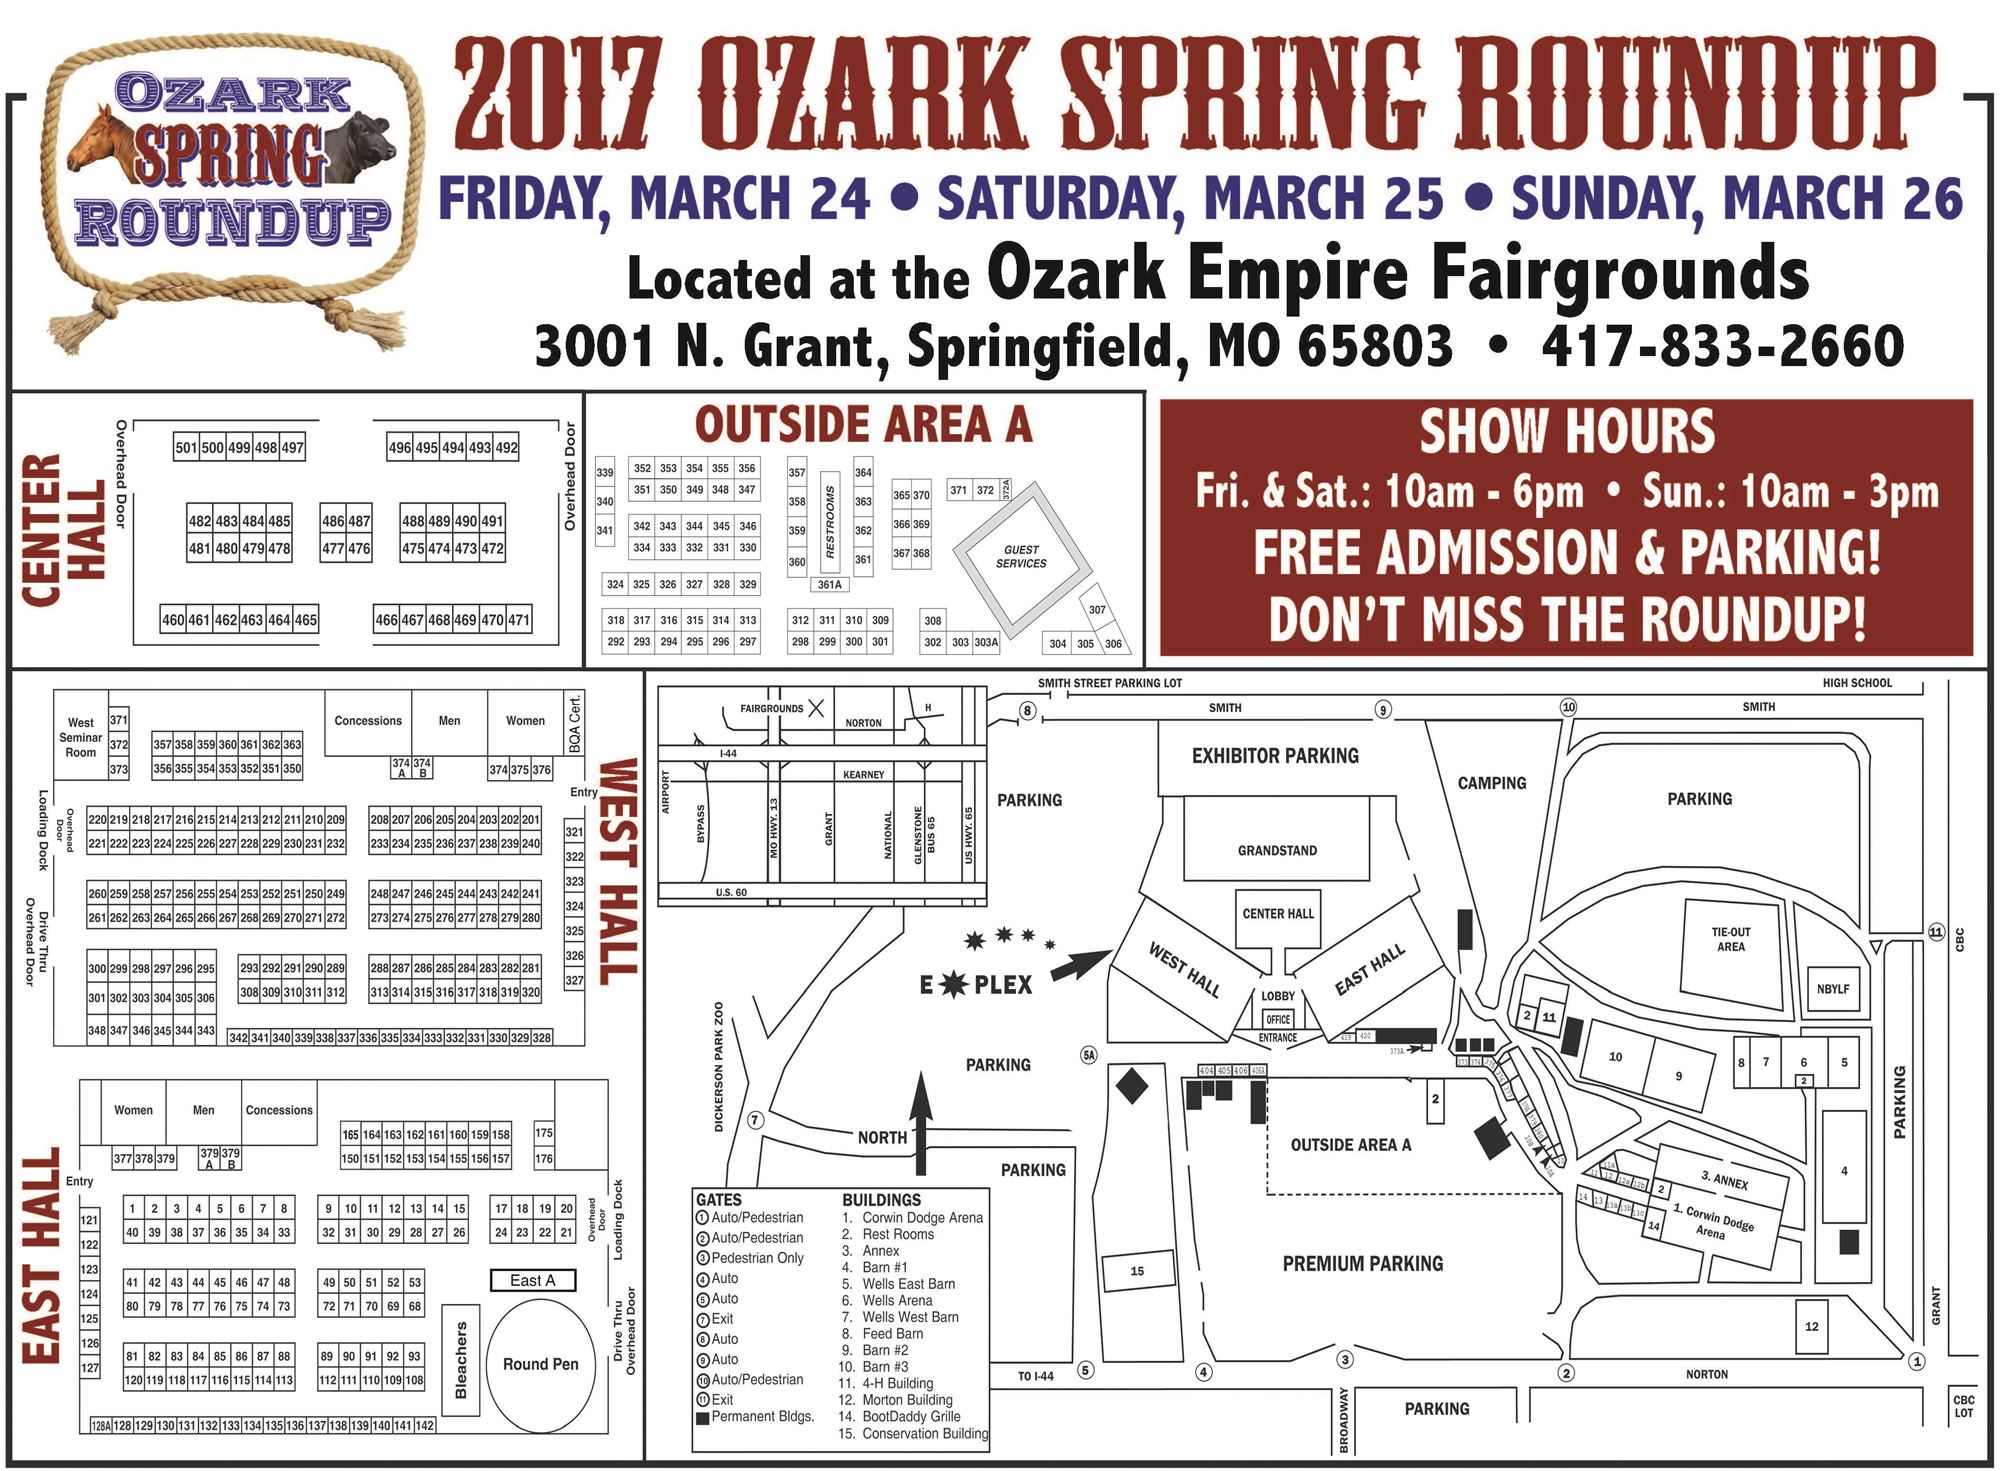 Visit us at Ozark Spring Roundup in Springfield, MO March 2426, 2017